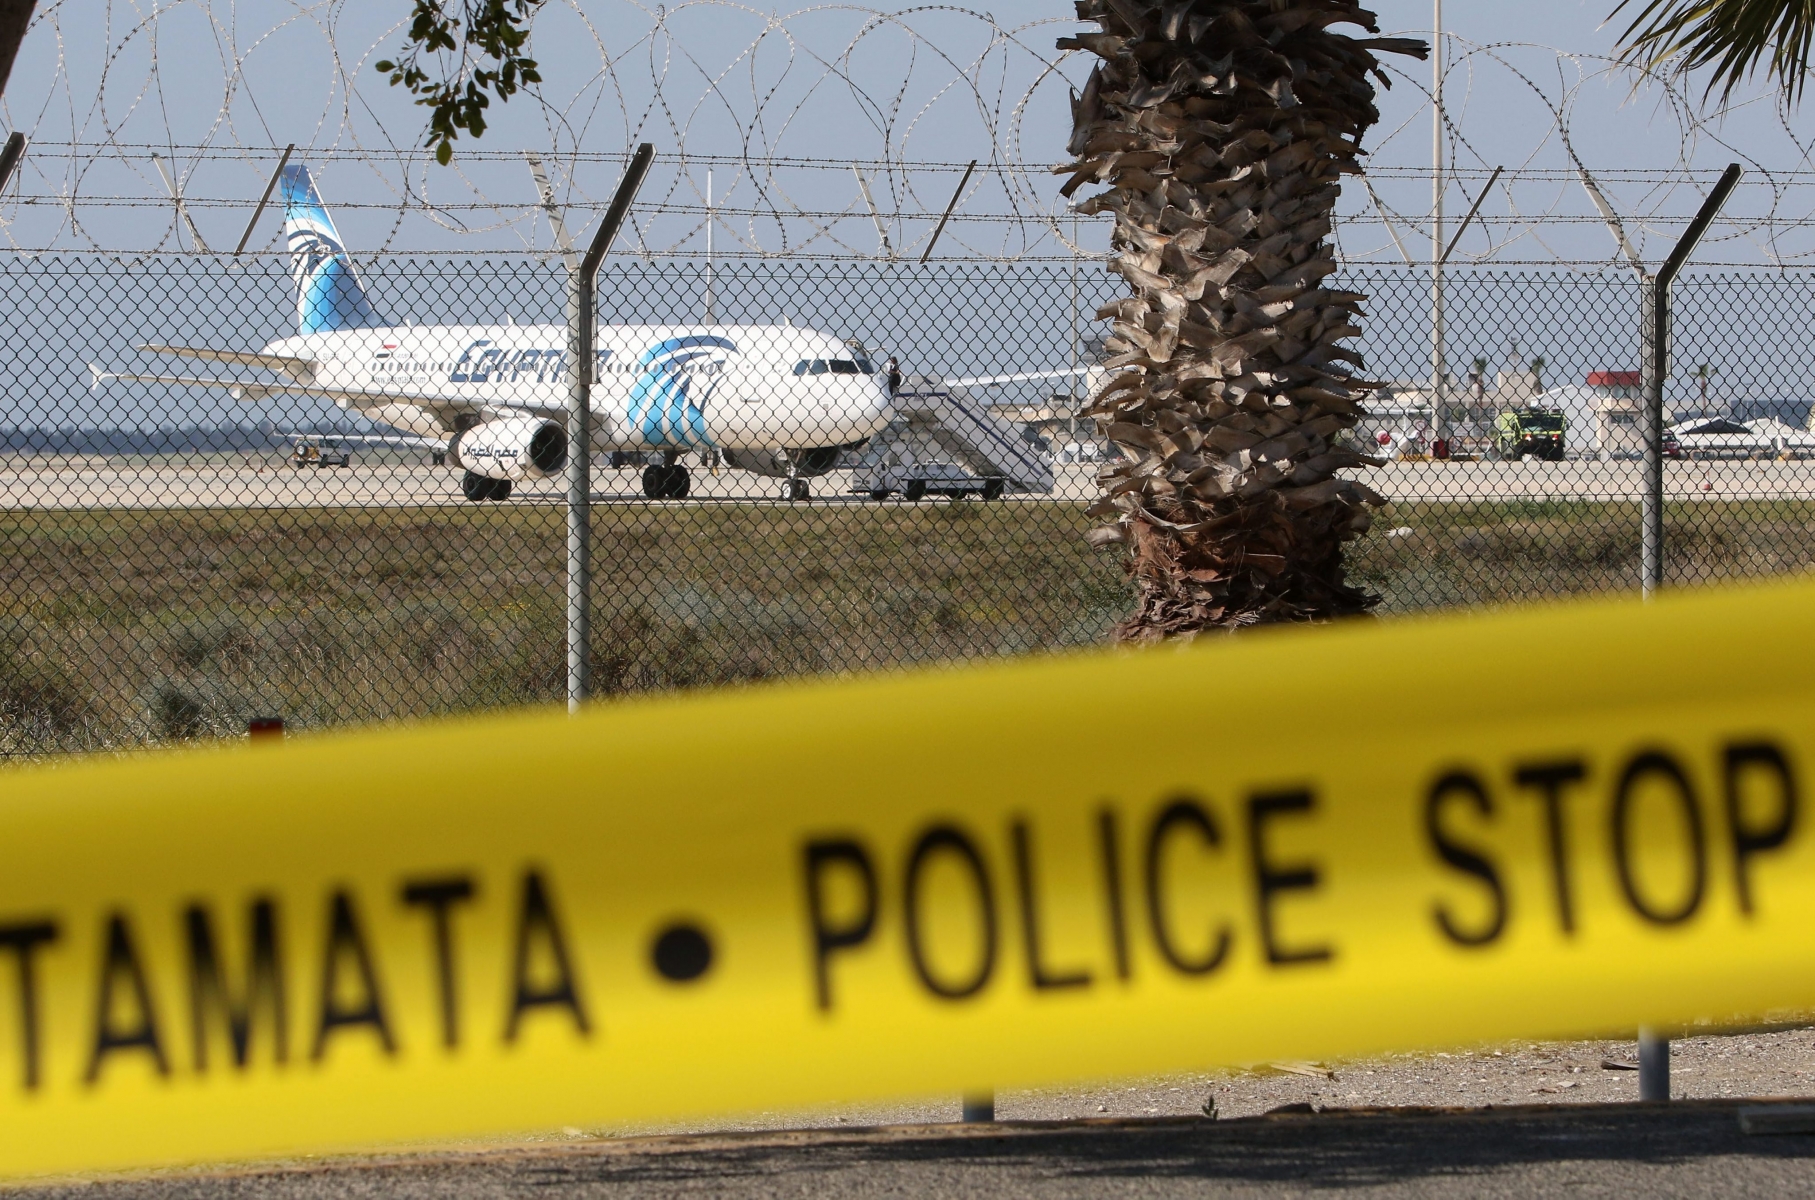 epa05234318 Police barrier tape seals off the area where a hijacked EgyptAir A320 plane was parked at Larnaca Airport, in Larnaca, Cyprus, 29 March 2016. The passenger plane from the Egyptian airline 'EgyptAir' was hijacked earlier the same morning, after being forced to divert its route from Alexandria to Cairo. The plane was carrying 81 passengers when it landed on Larnaca airport in Cyprus.  EPA/KATIA CHRISTODOULOU